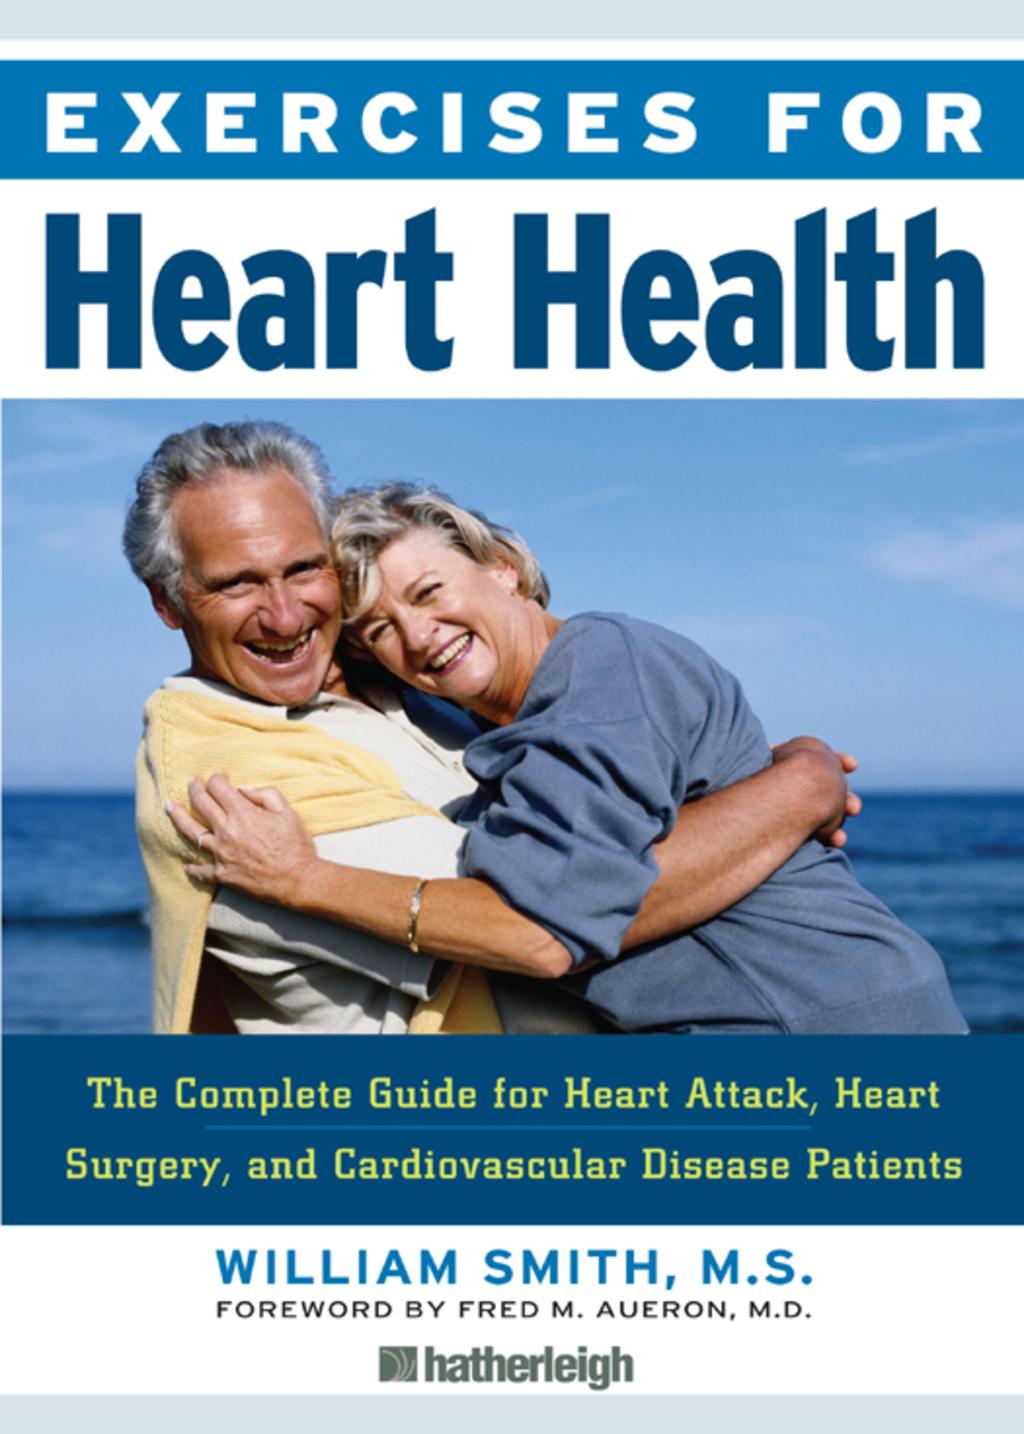 Exercises for Heart Health (eBook) - William Smith,